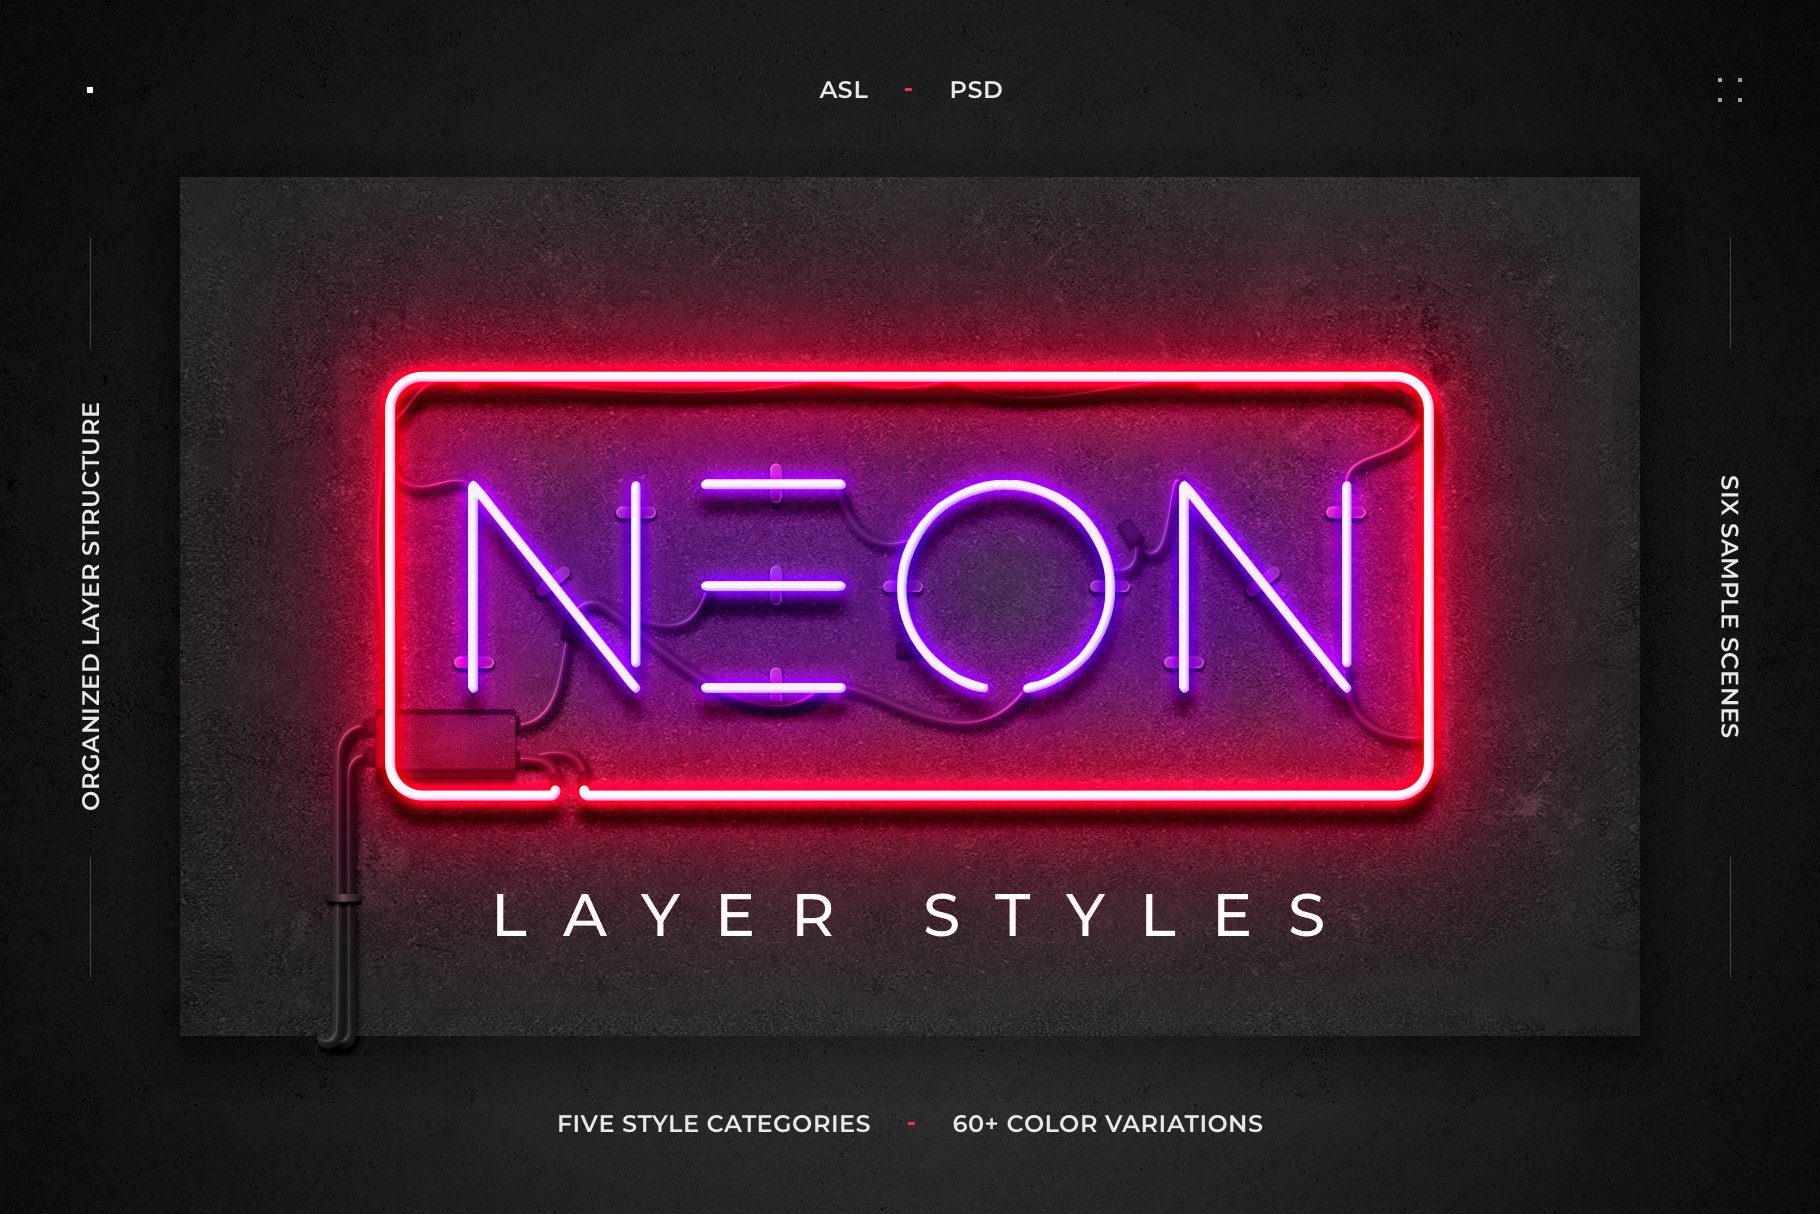 Neon Layer Stylescover image.